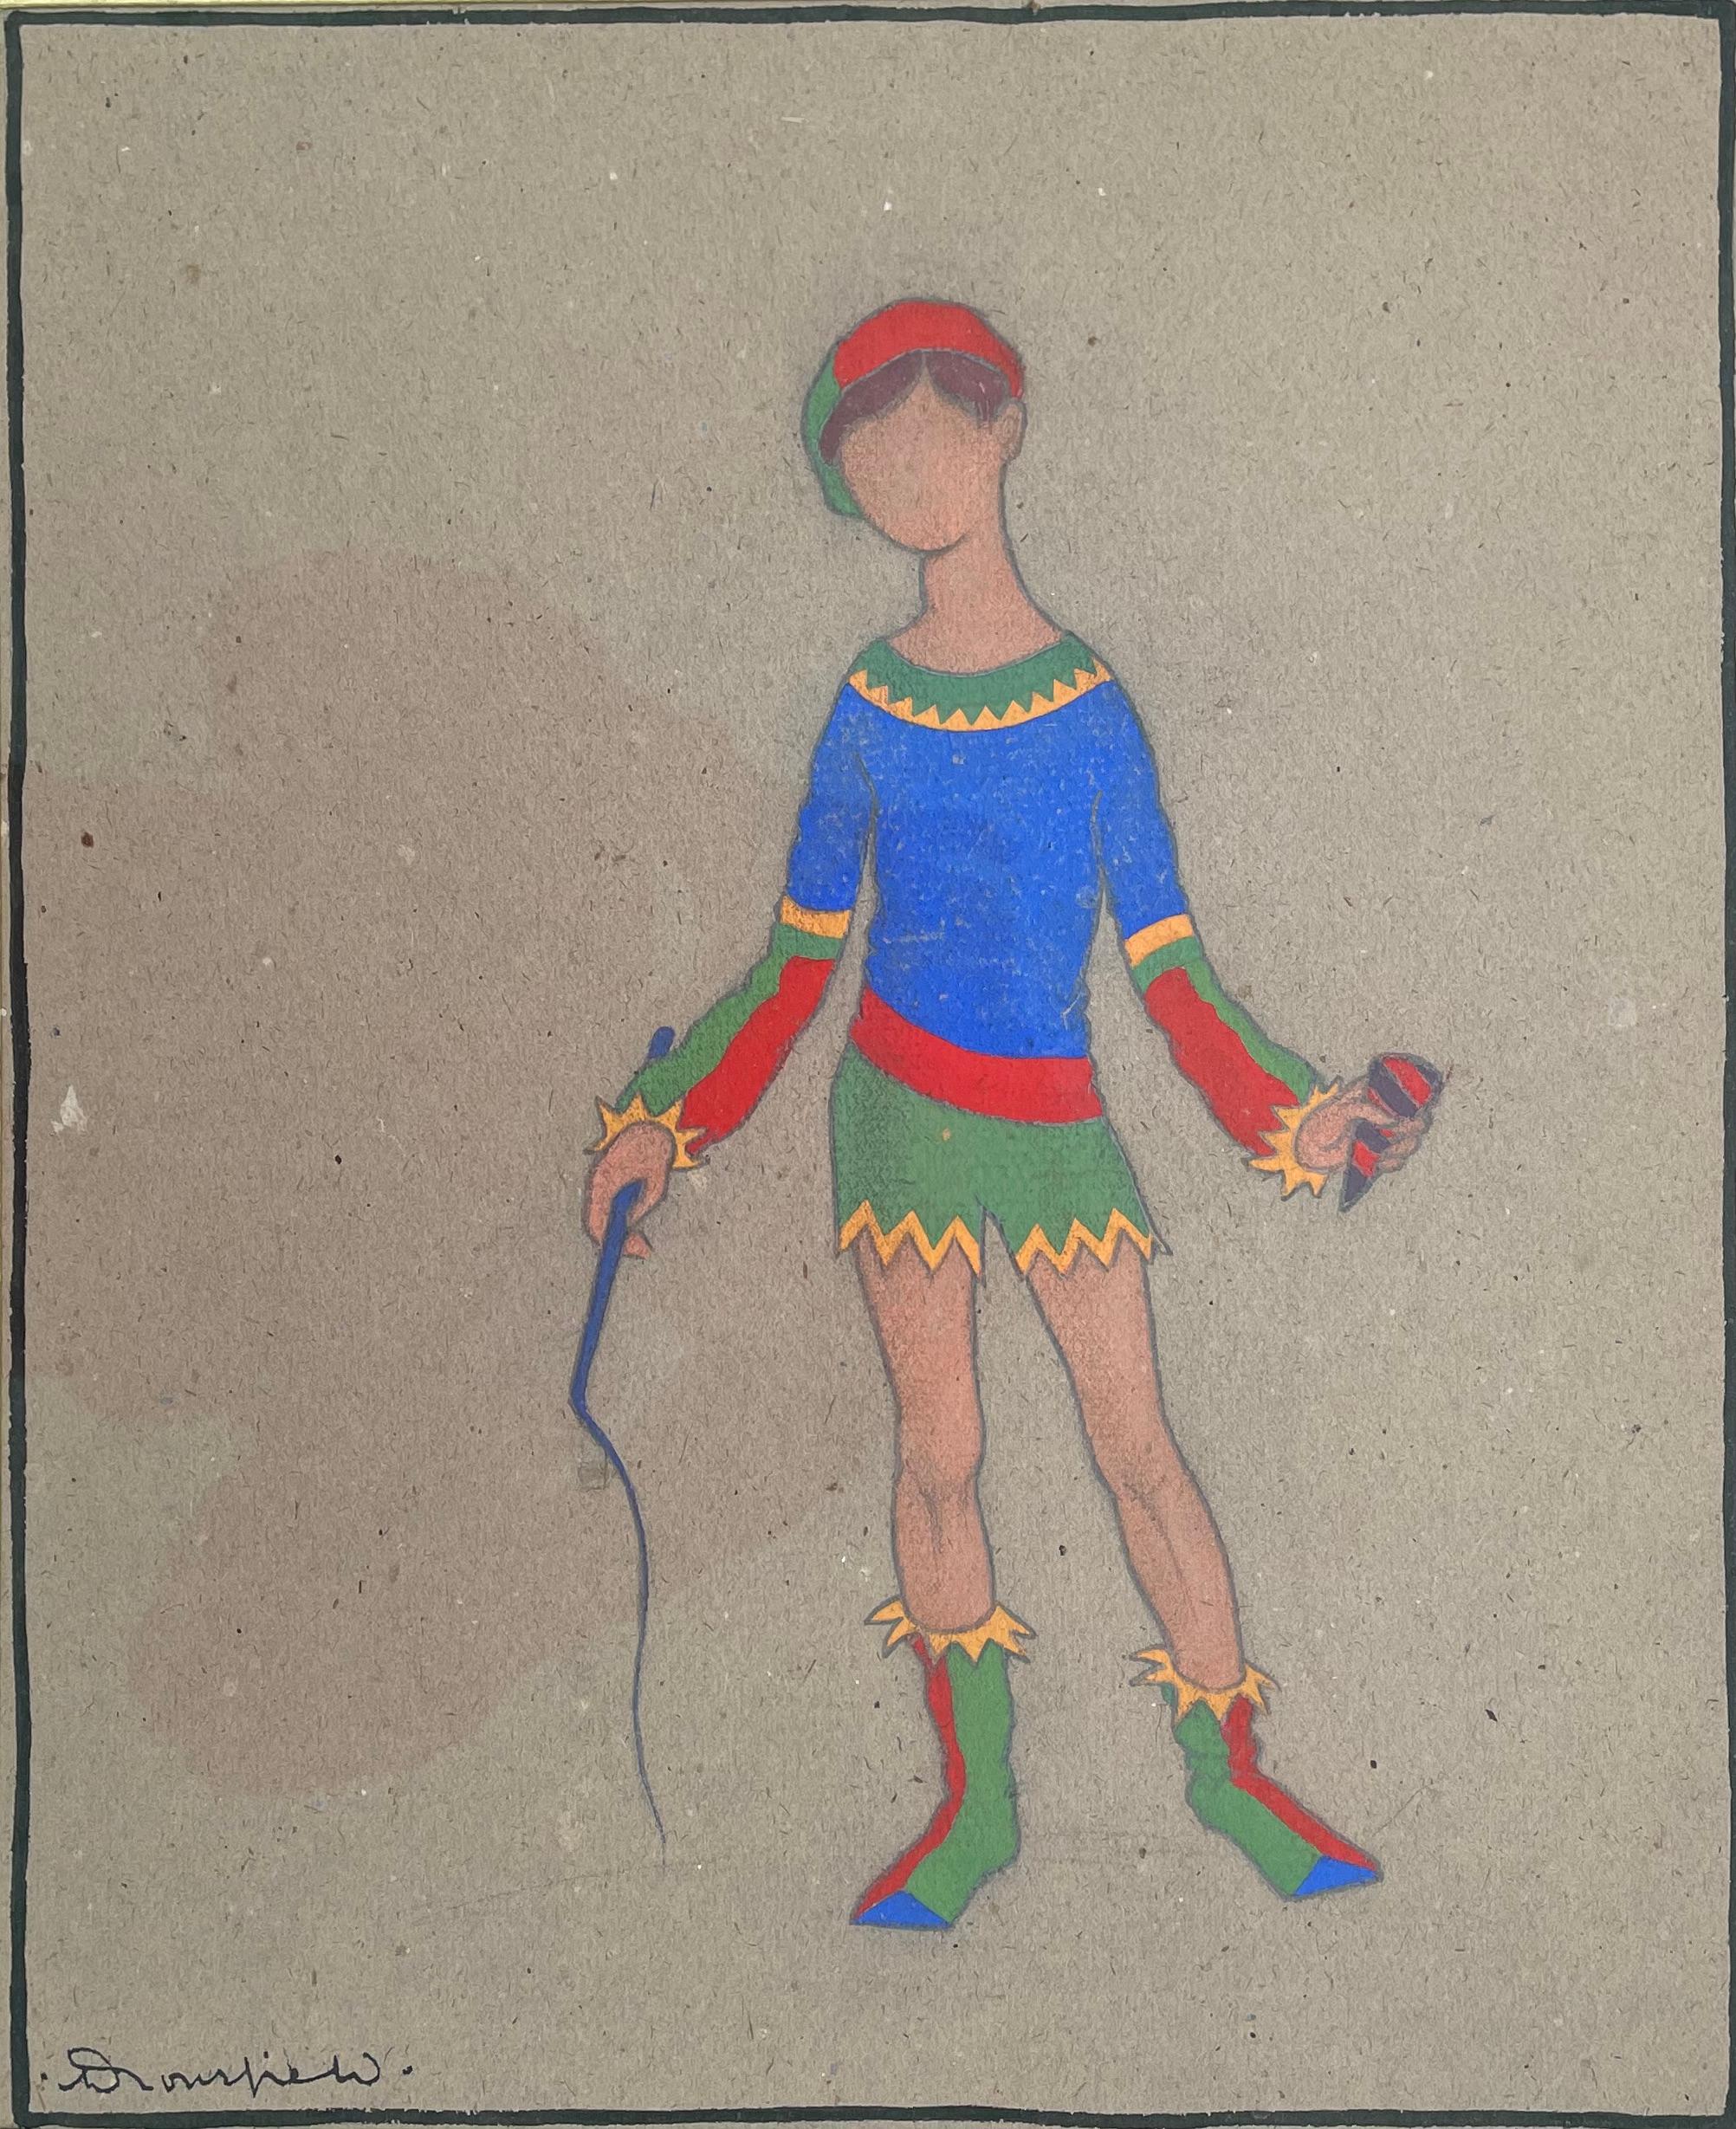 JOHN DRONSFIELD
(1900-1951)

Boy with Whip and Top

Signed l.r.: Dronsfield
Watercolour
Unframed

40 by 33 cm., 15 ¾ by 13 in.
(mount size 59.5 by 51 cm., 23 ½ by 20 in.)

John Marsden Dronsfield was born in Lancashire.  He studied briefly at